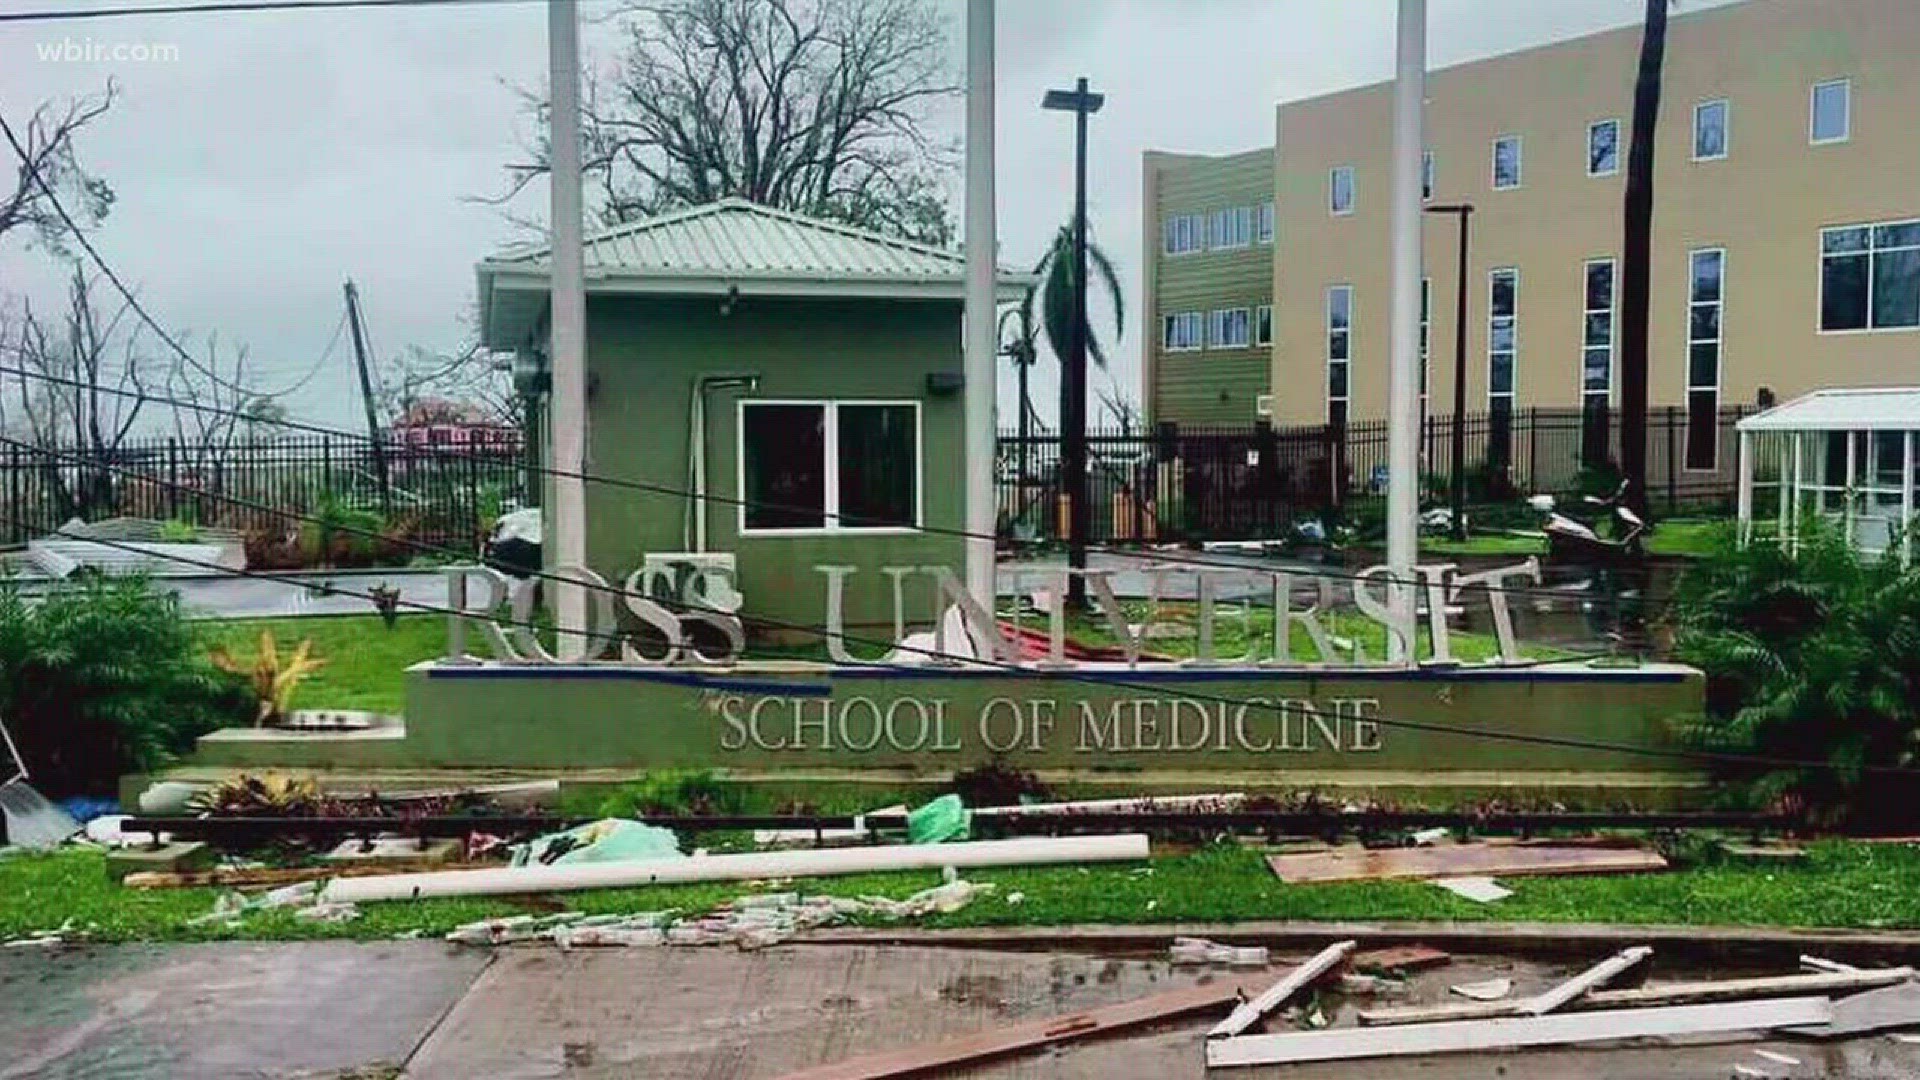 Nov. 8, 2017: Ross University, a medical school on the Caribbean island of Dominica, is temporarily relocating to Knoxville after their school was destroyed by Hurricane Maria.